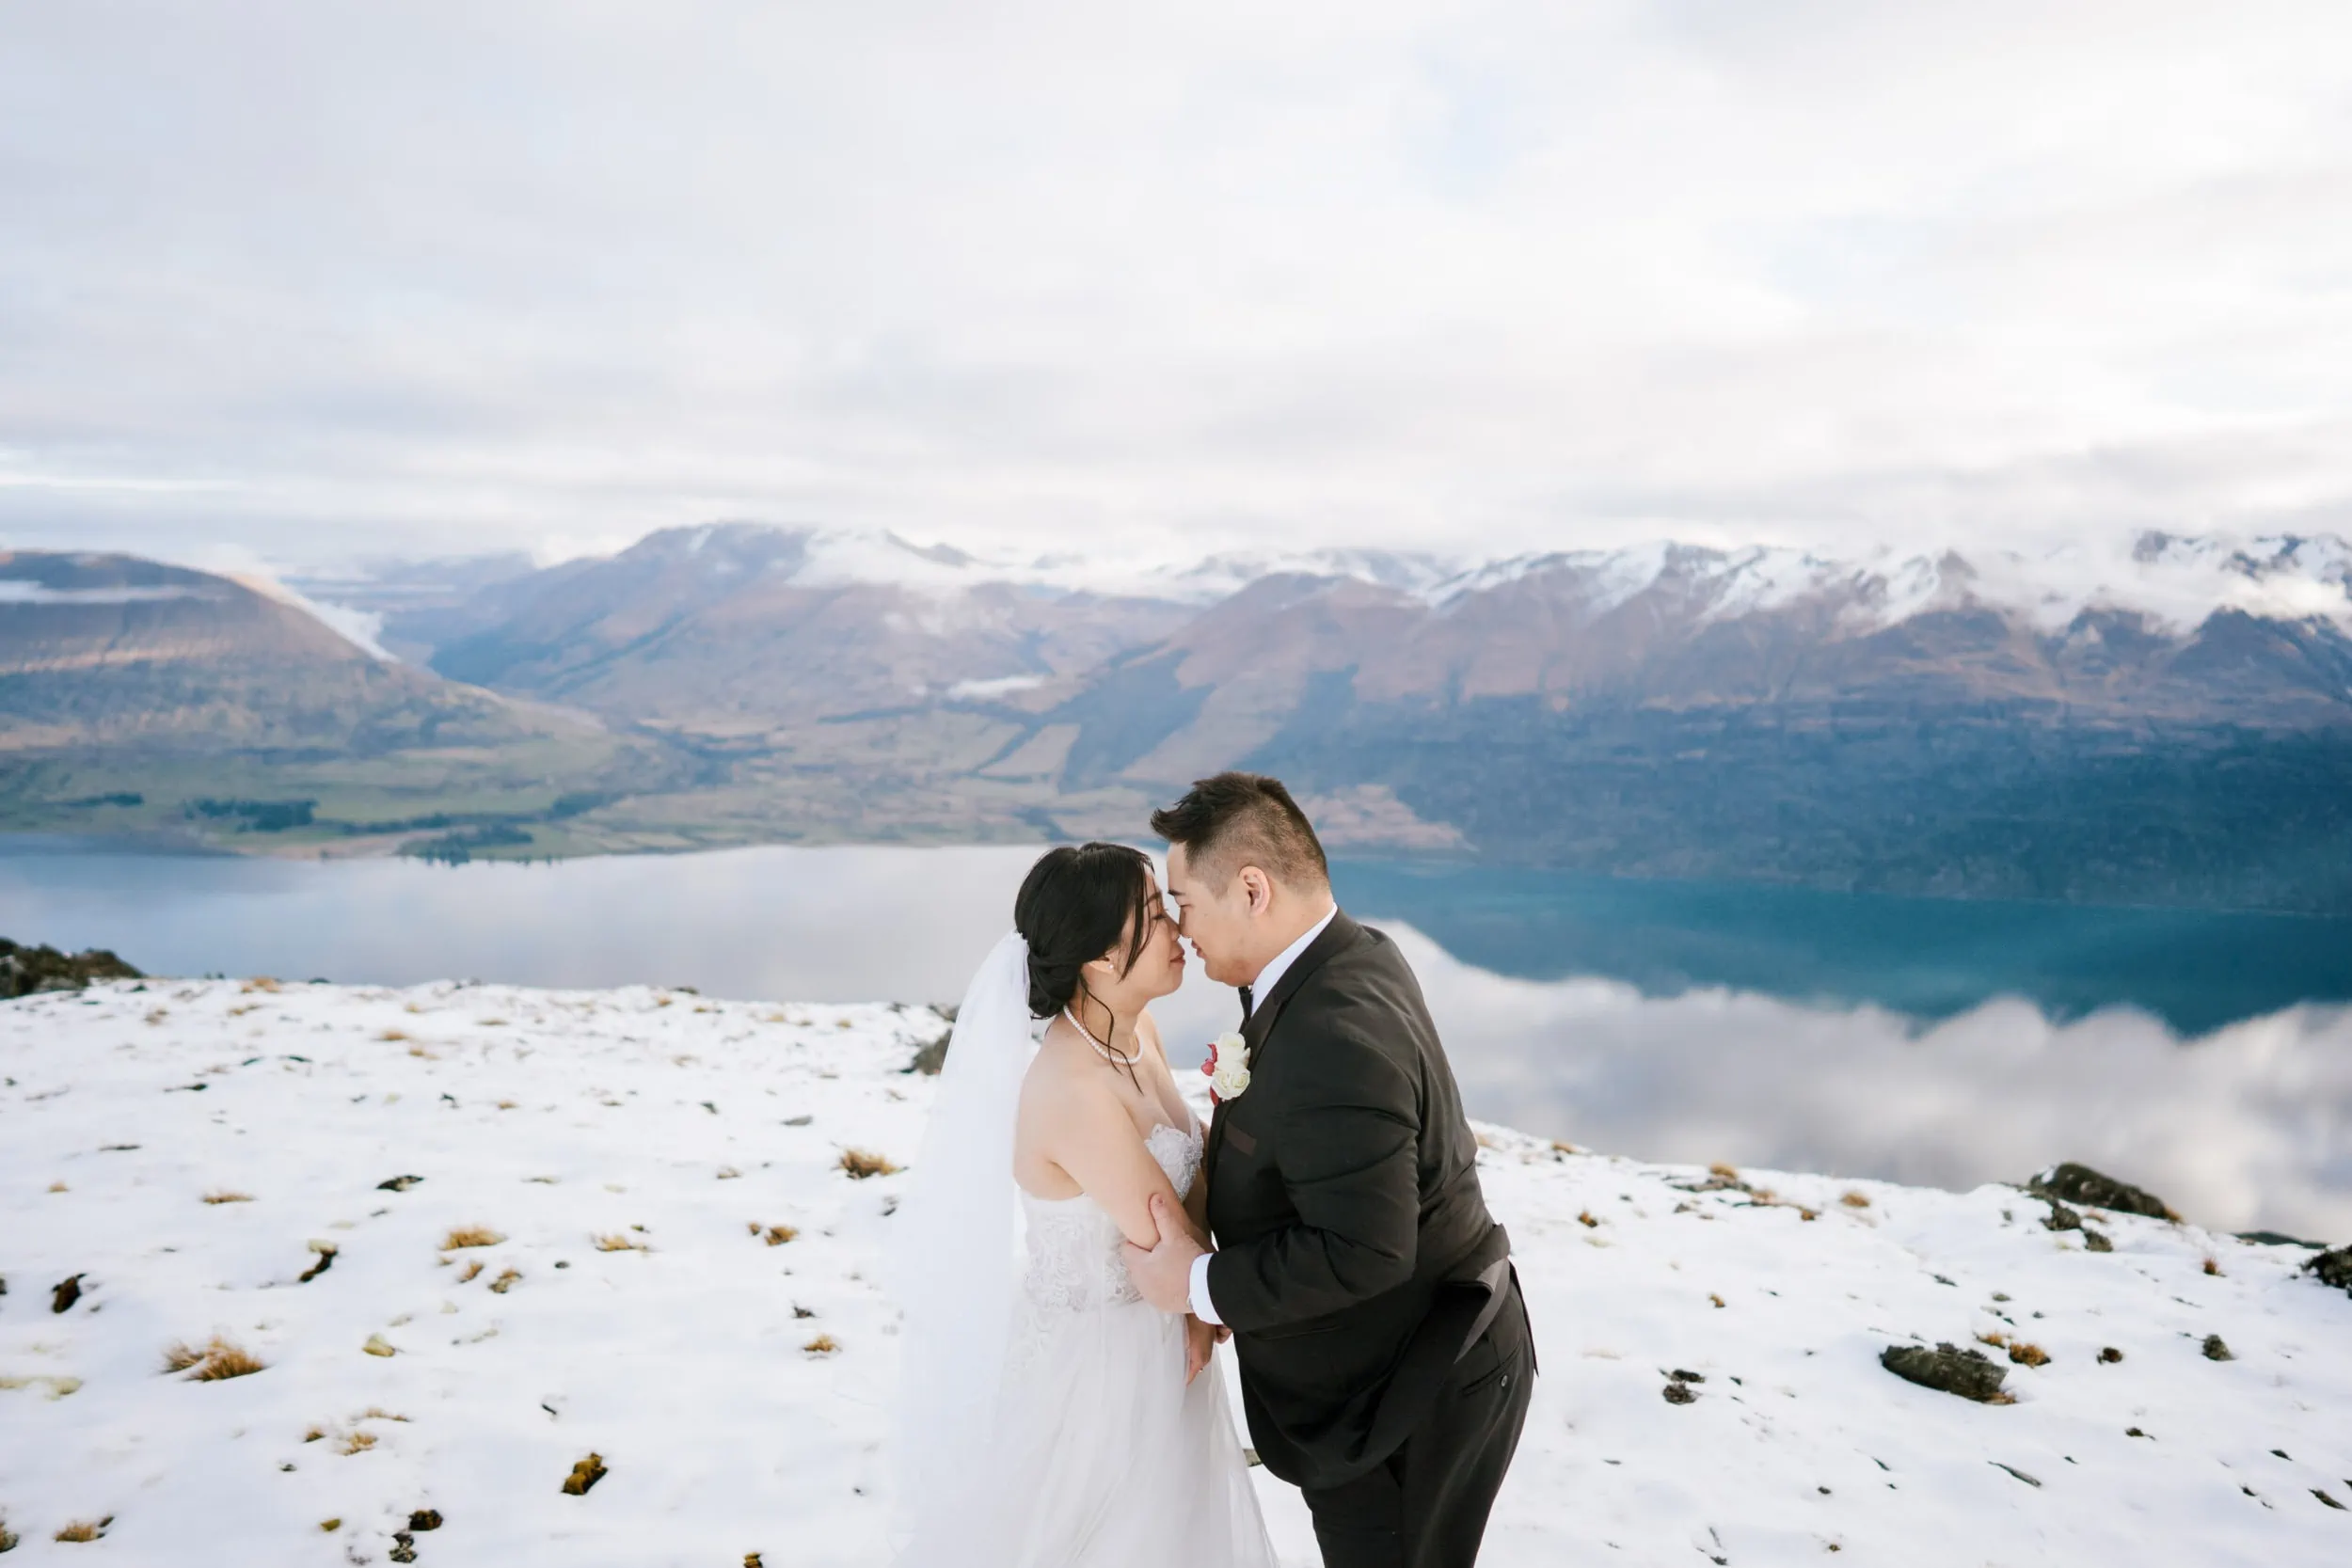 Queenstown New Zealand Elopement Wedding Photographer - Lam and Wendy's Heli Shoot captures a bride and groom kissing on a snow-covered mountain in Queenstown, New Zealand.